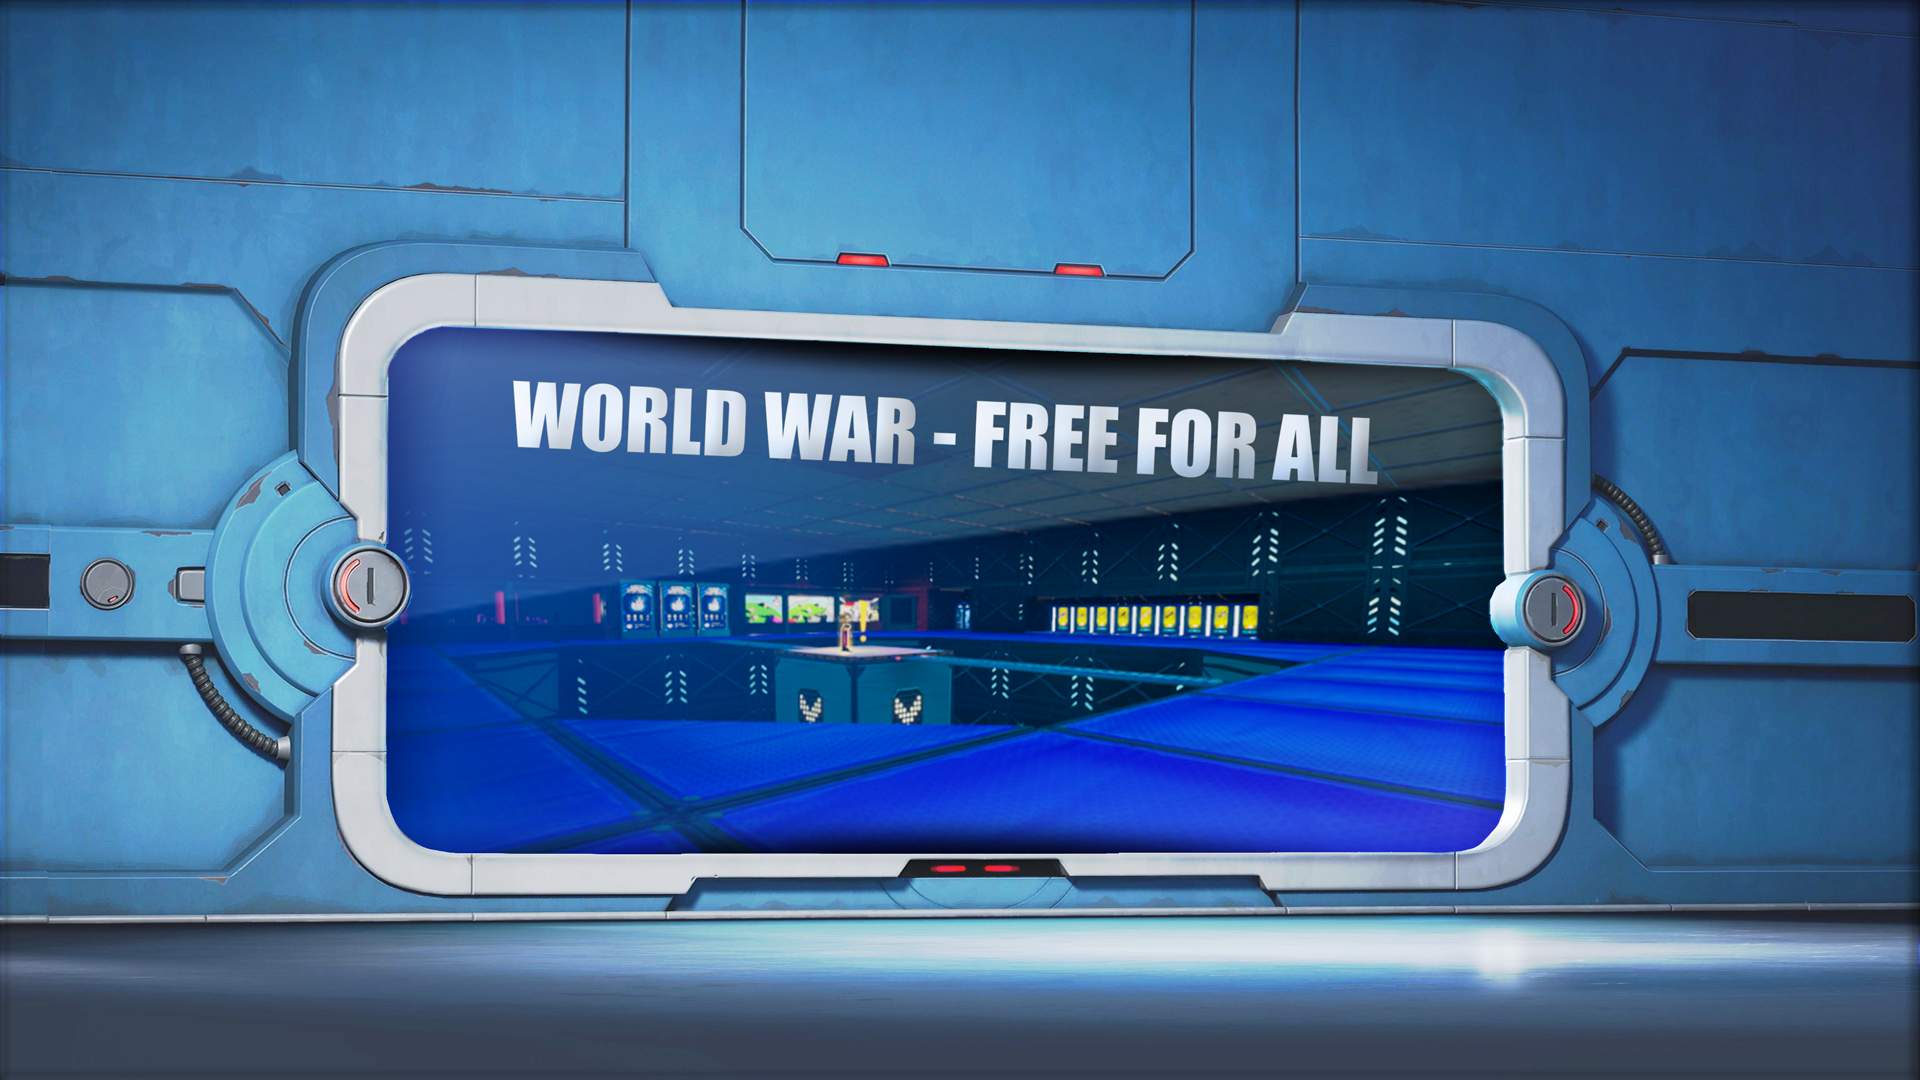 WORLD WAR - FREE FOR ALL